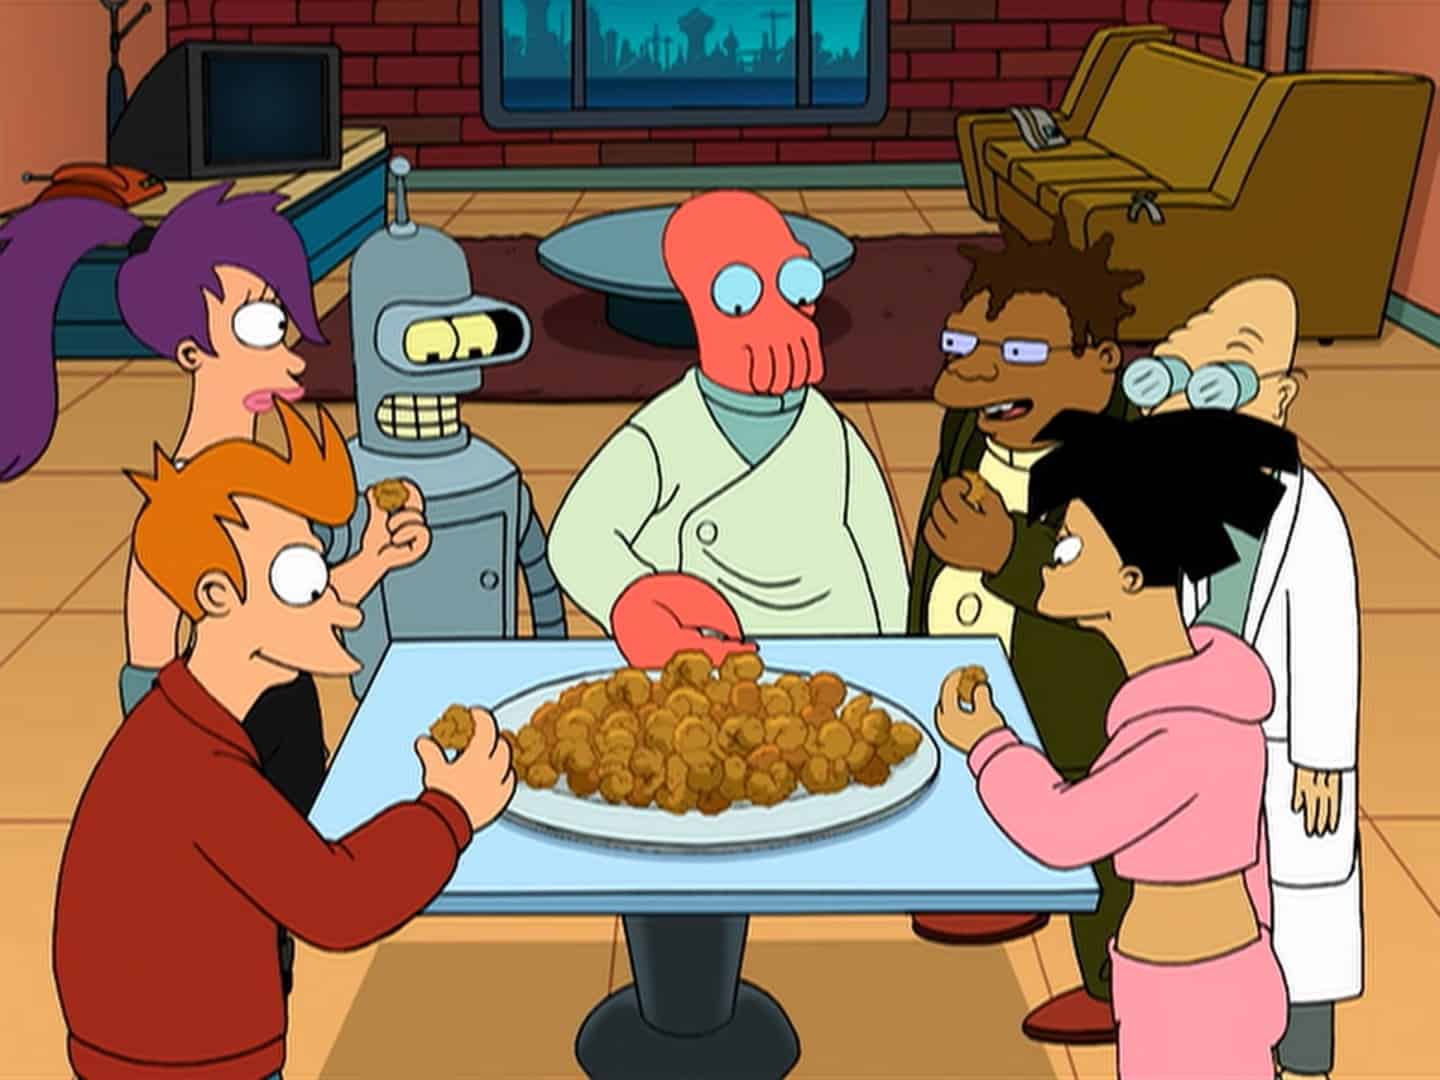 The crew of the Planet Express crowded around a plate of Popplers in this image from 20th Century Fox Television